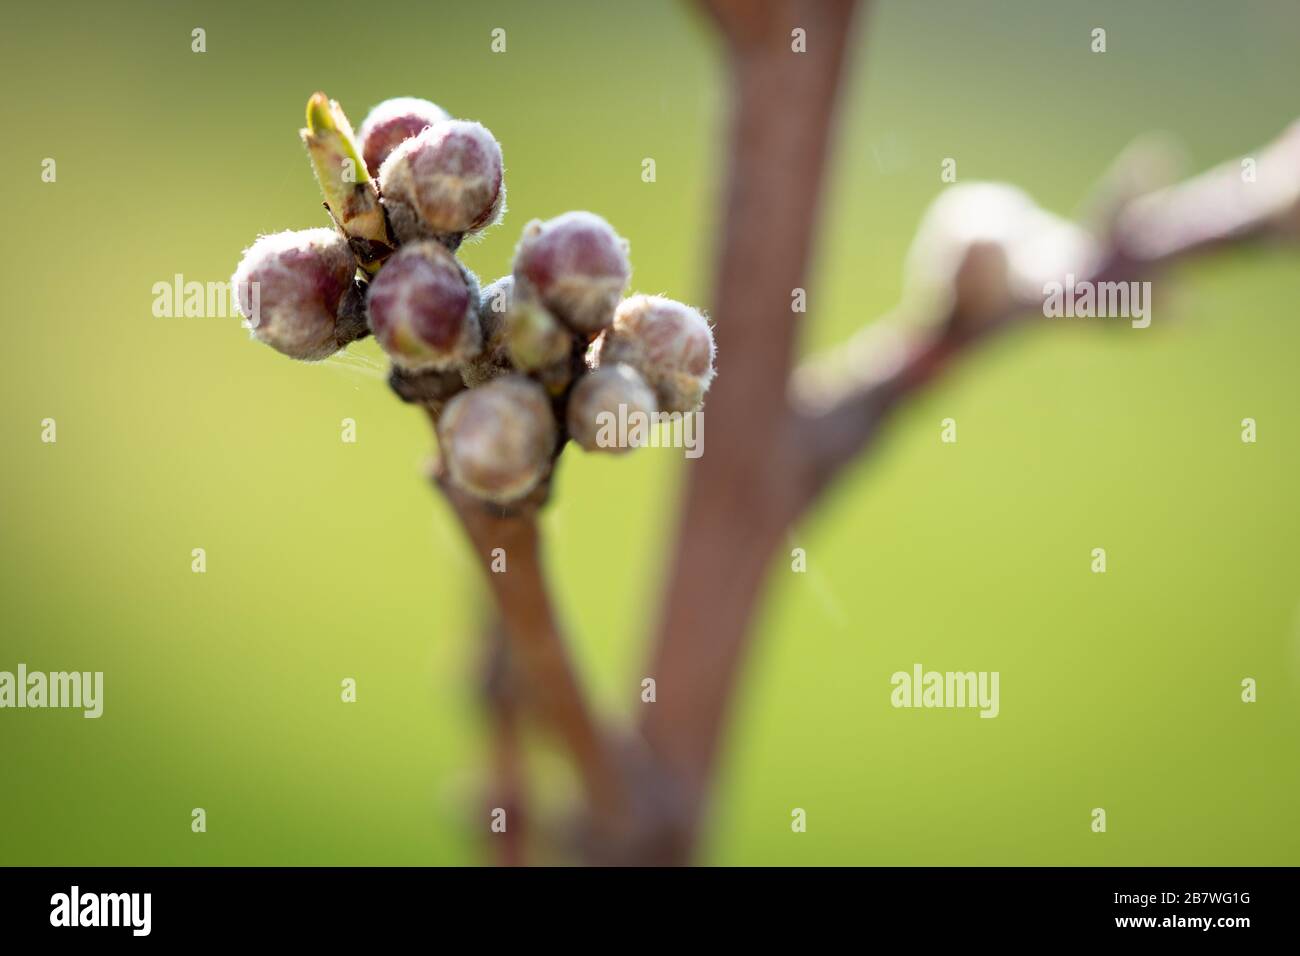 Peach blossom buds before an out-of-focus green background Stock Photo